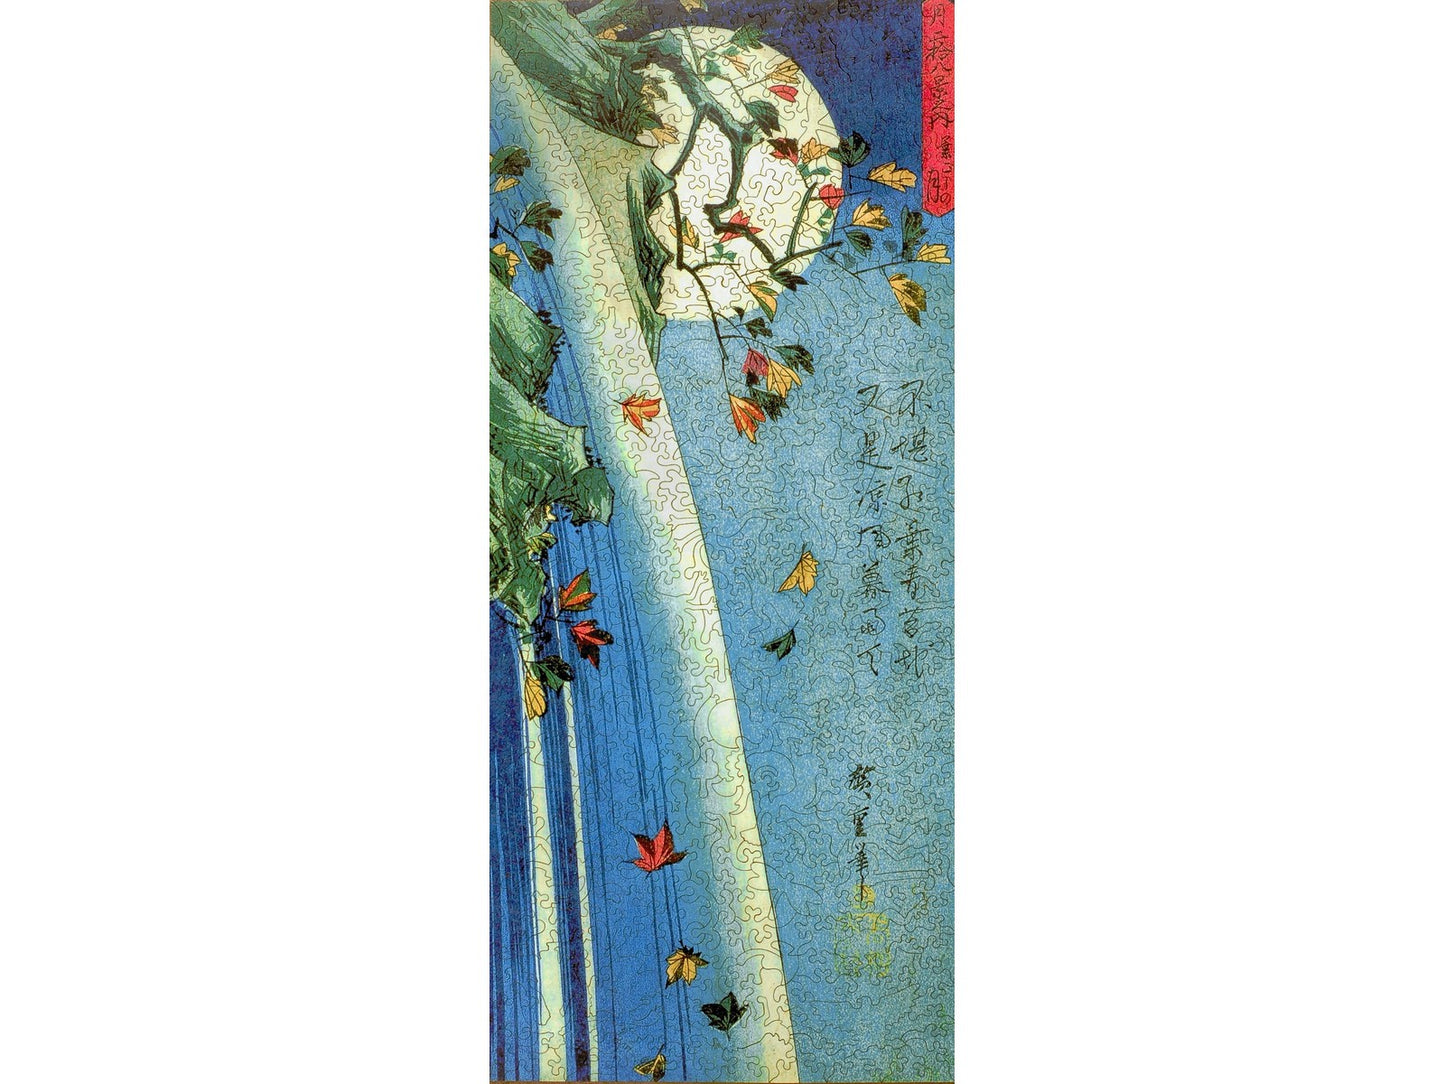 The front of the puzzle, Moon Over a Waterfall, which shows a Japanese style woodblock print of falling water and a tree branch in front of a full moon.